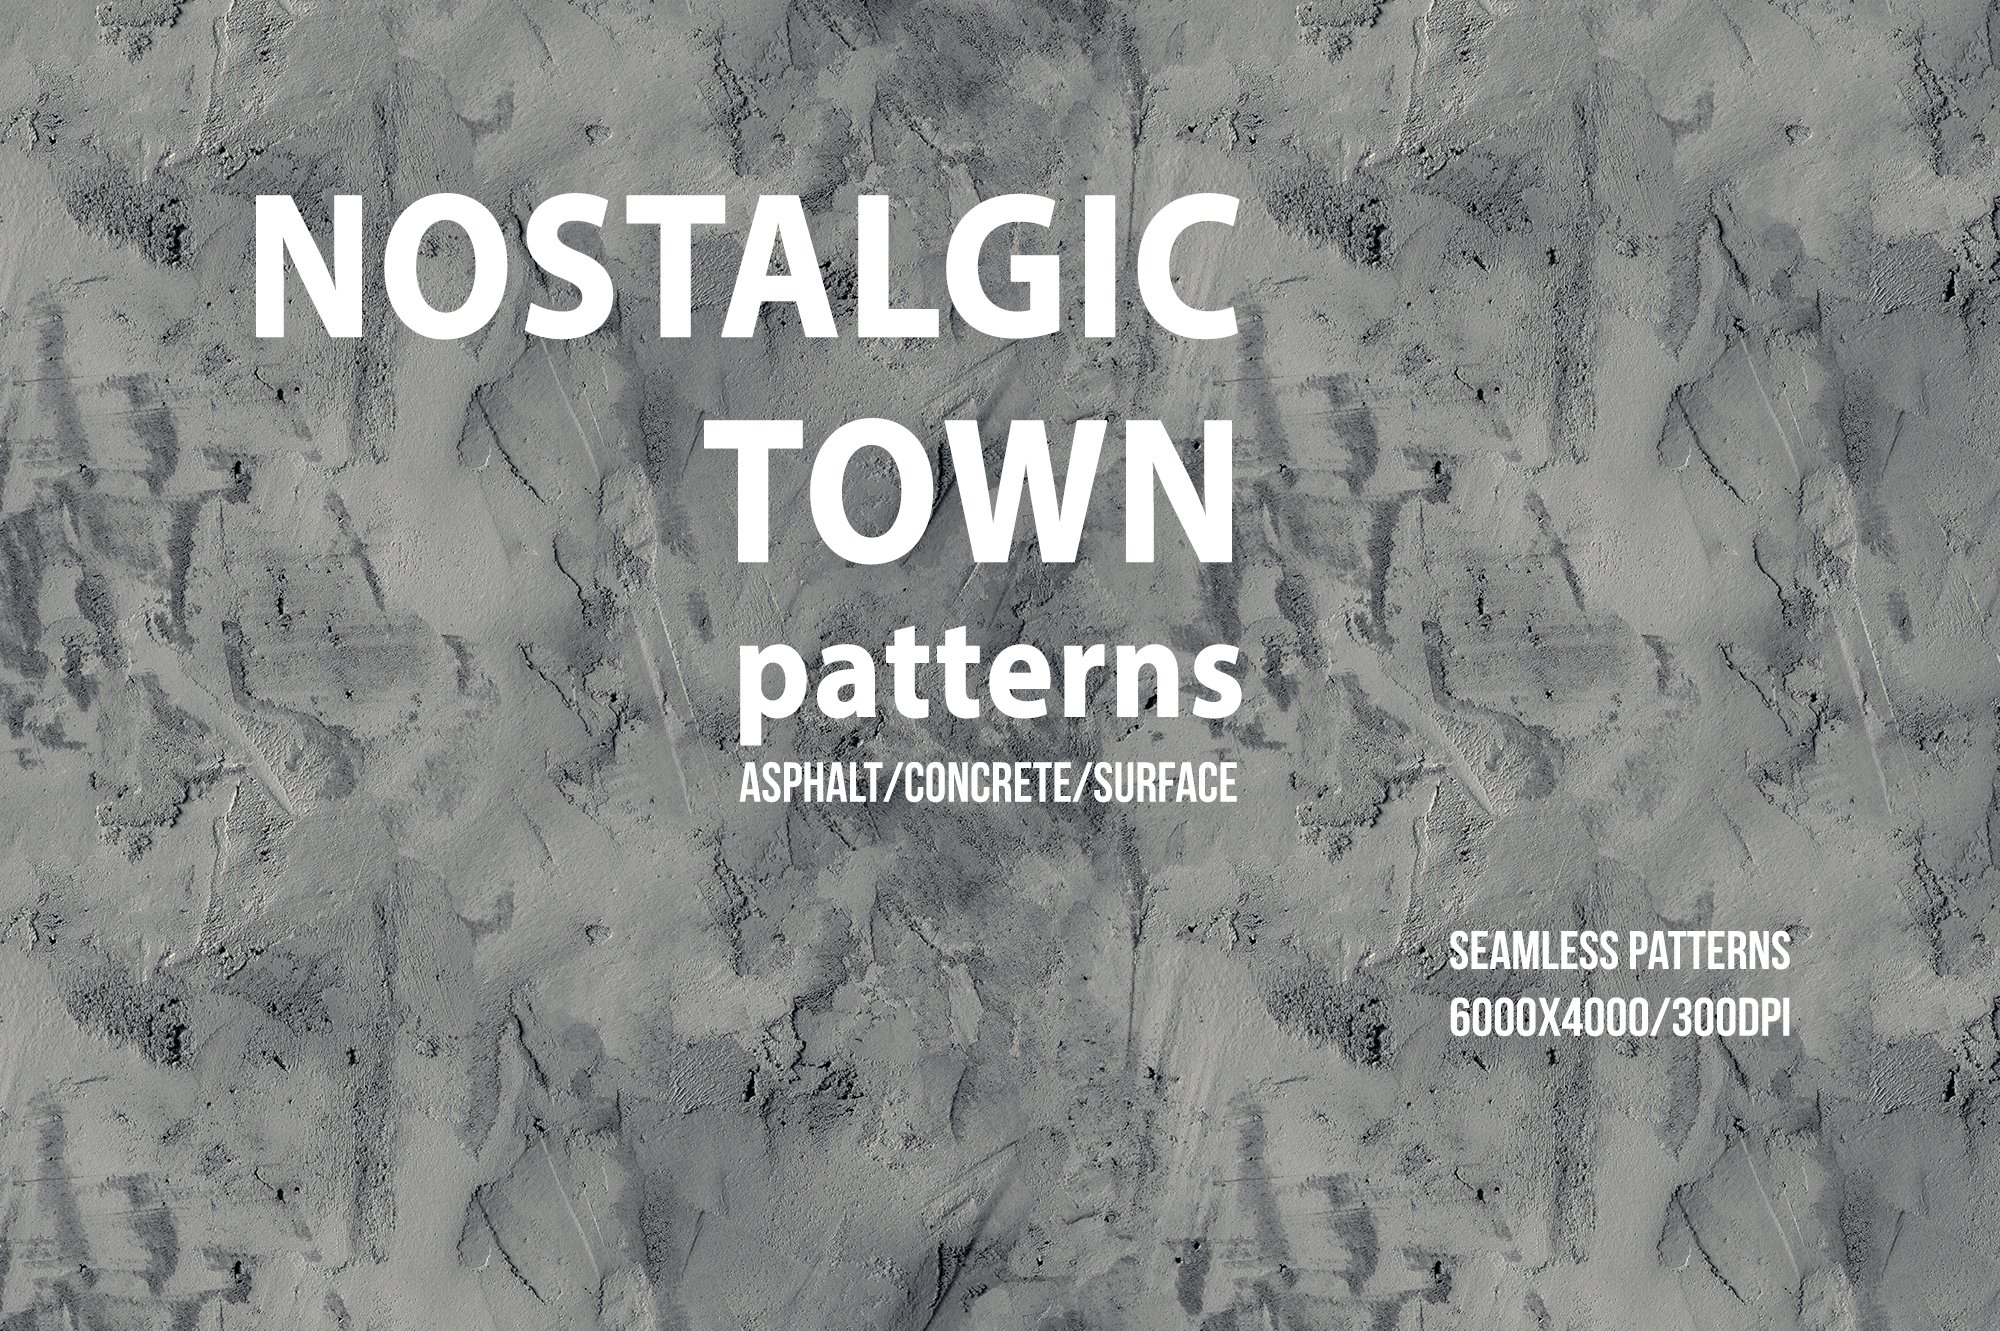 Nostalgic Town: Patterns cover image.